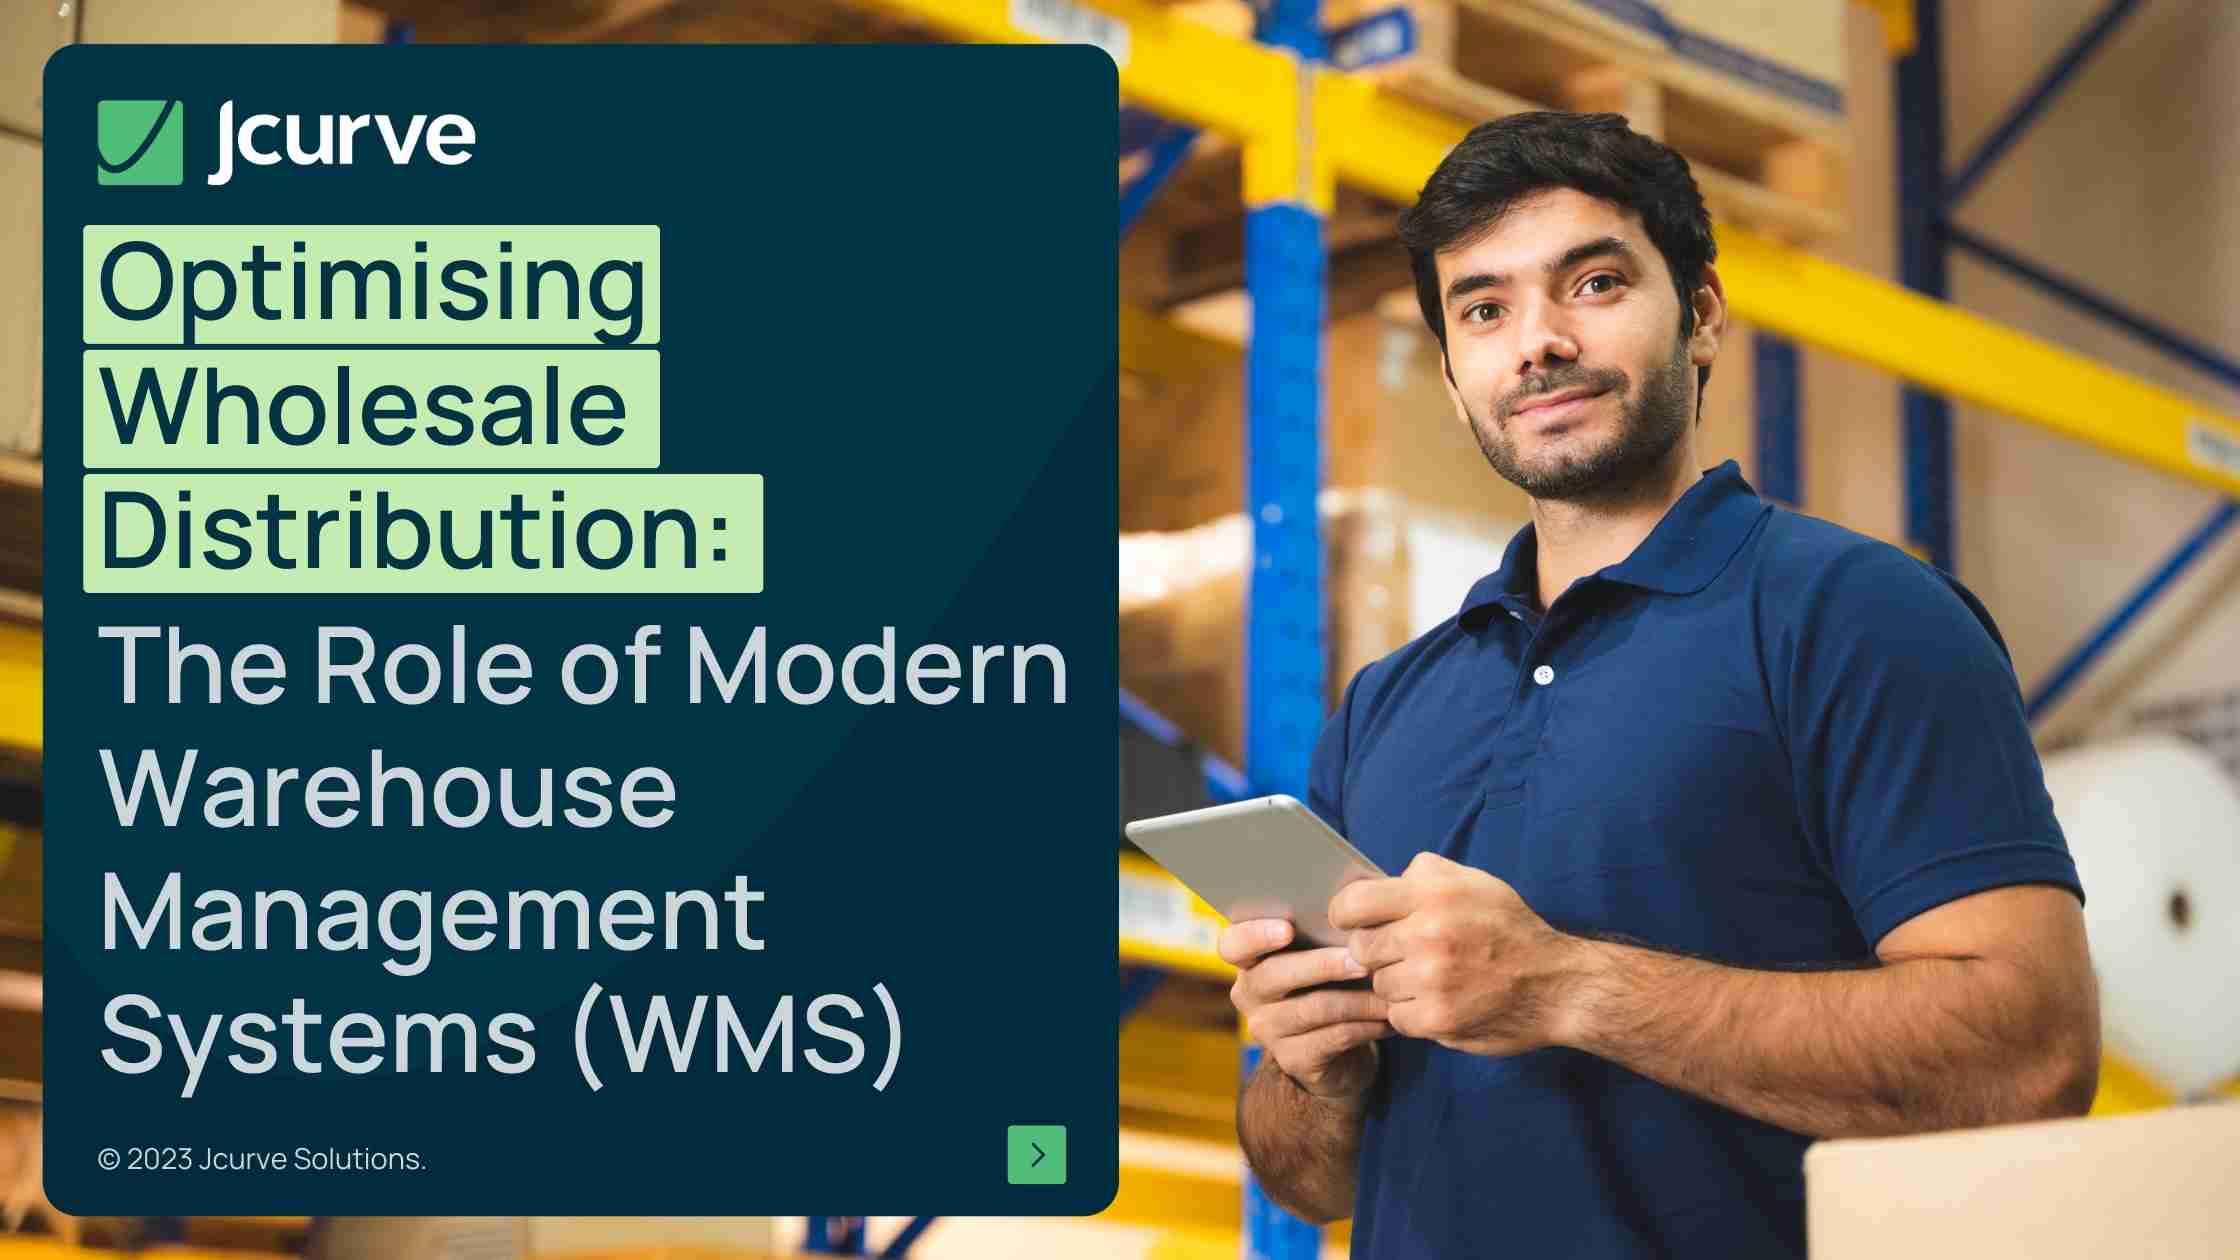 Optimising Wholesale Distribution: The Role of Modern Warehouse Management Systems (WMS)